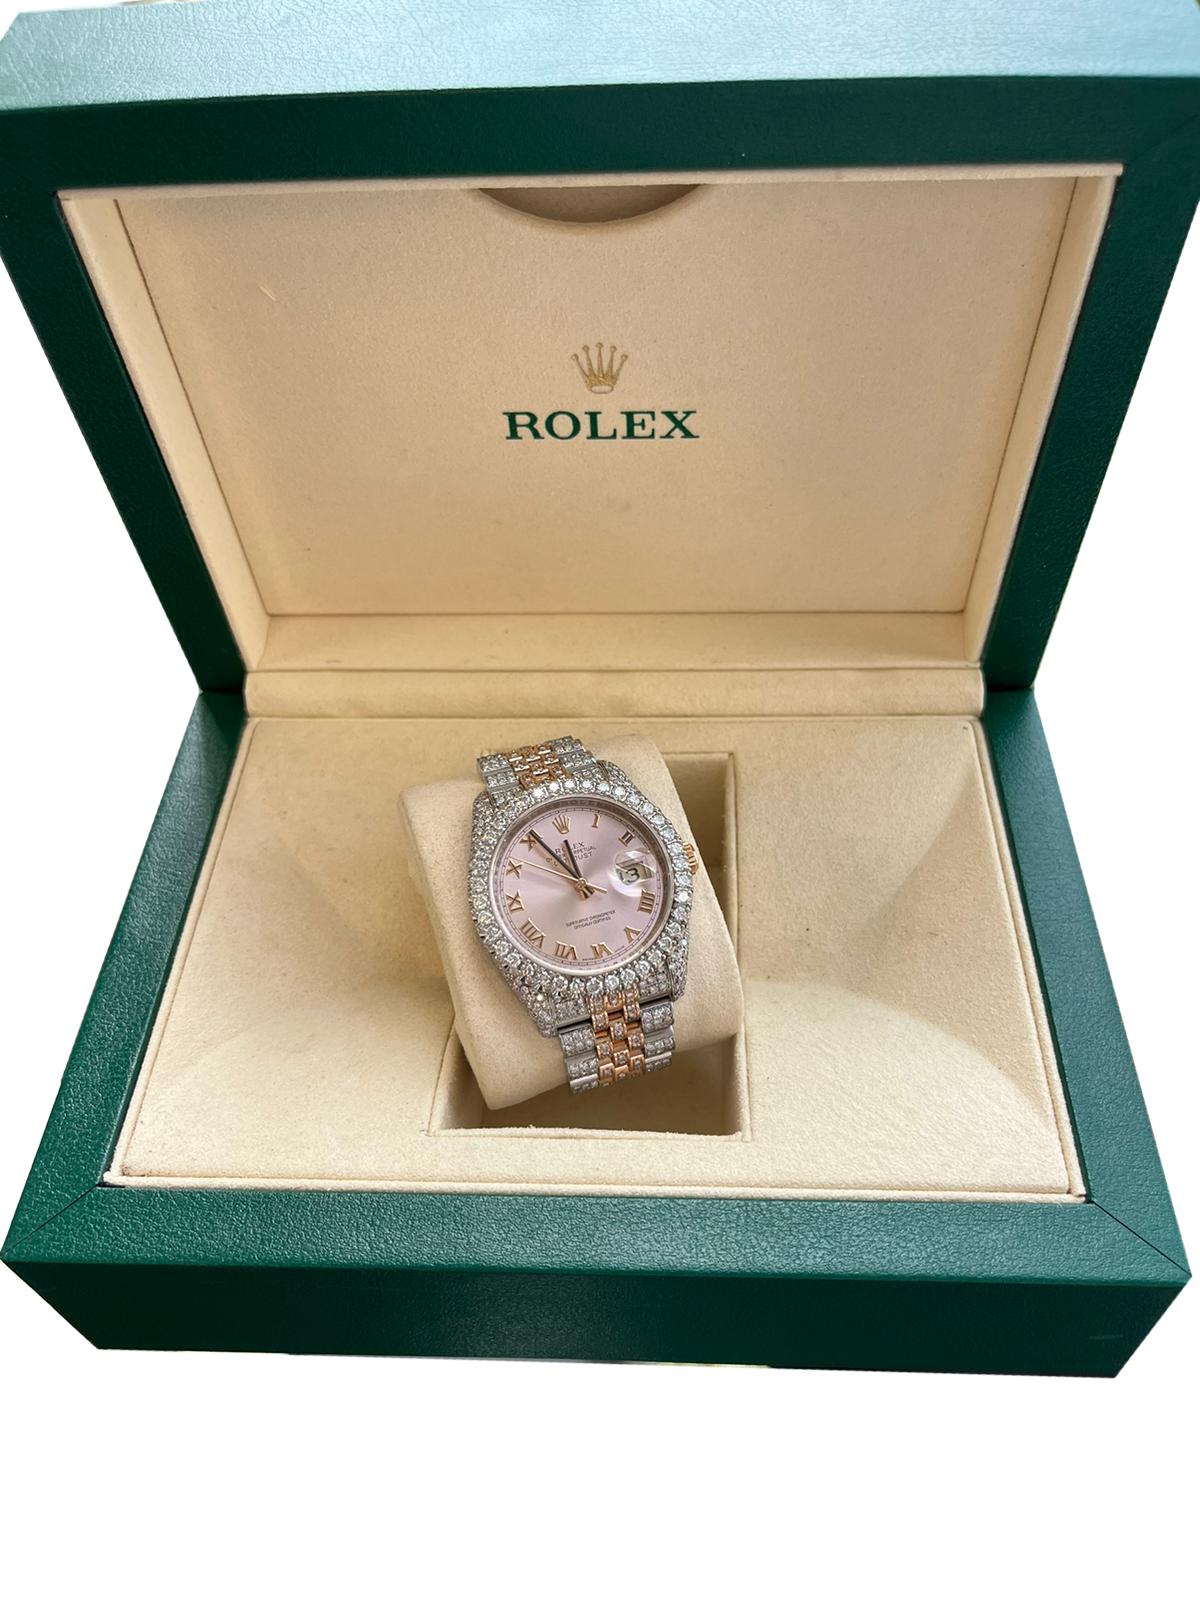 Rolex Datejust 36mm Rose Gold Roman Dial Iced Out Diamond Bezel Watch Jubilee Band Watch 116233, This Rolex Datejust has Iced Out Diamonds Two-Tone Stainless Steel and Rose Gold Watch with Original box.

Details:
Brand: Rolex
Model: Datejust